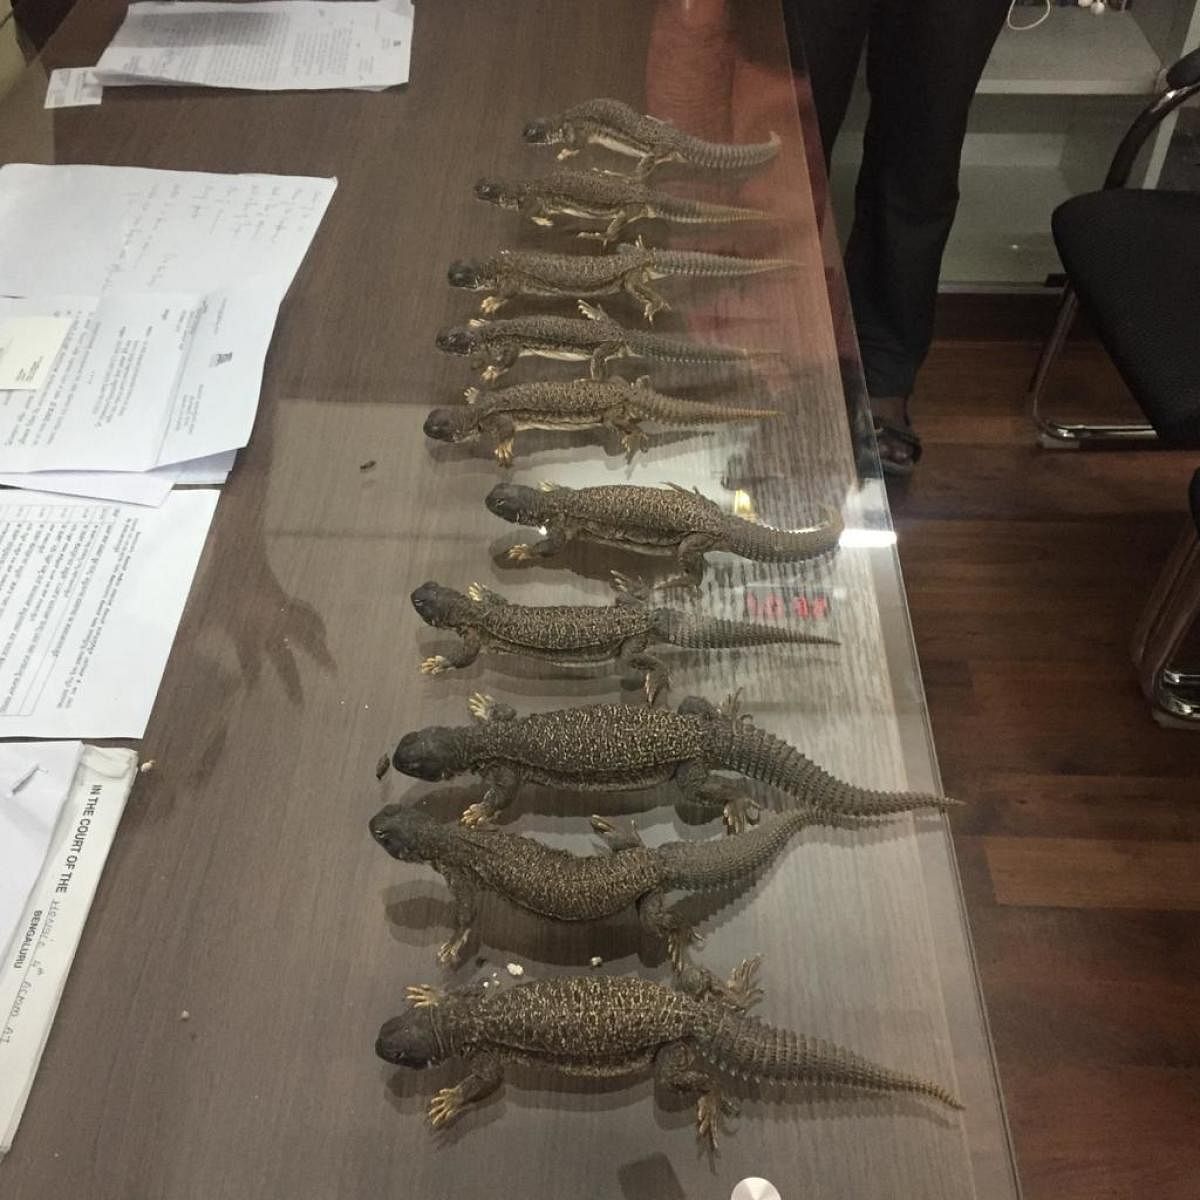 Ten spiny-tailed lizards endemic to the deserts of Rajasthan were found in a bag which Koramangala police believe was destined for Hosur. Police said that animals were to be killed to create aphrodisiacs. PIC COURTESY: POLICE